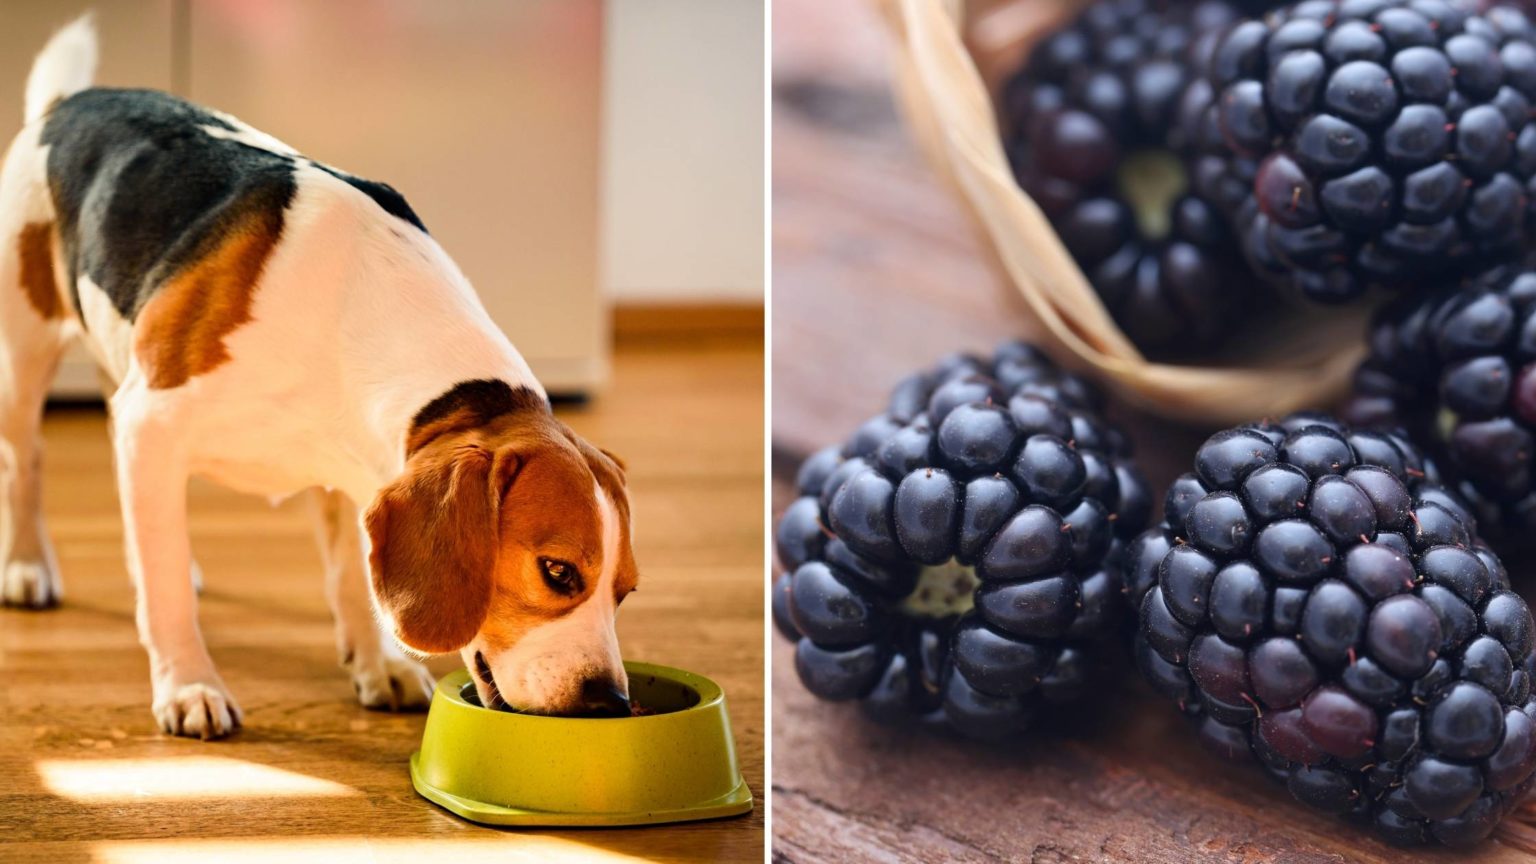 Can Dogs Eat Blackberries? Are They Safe for Dogs?